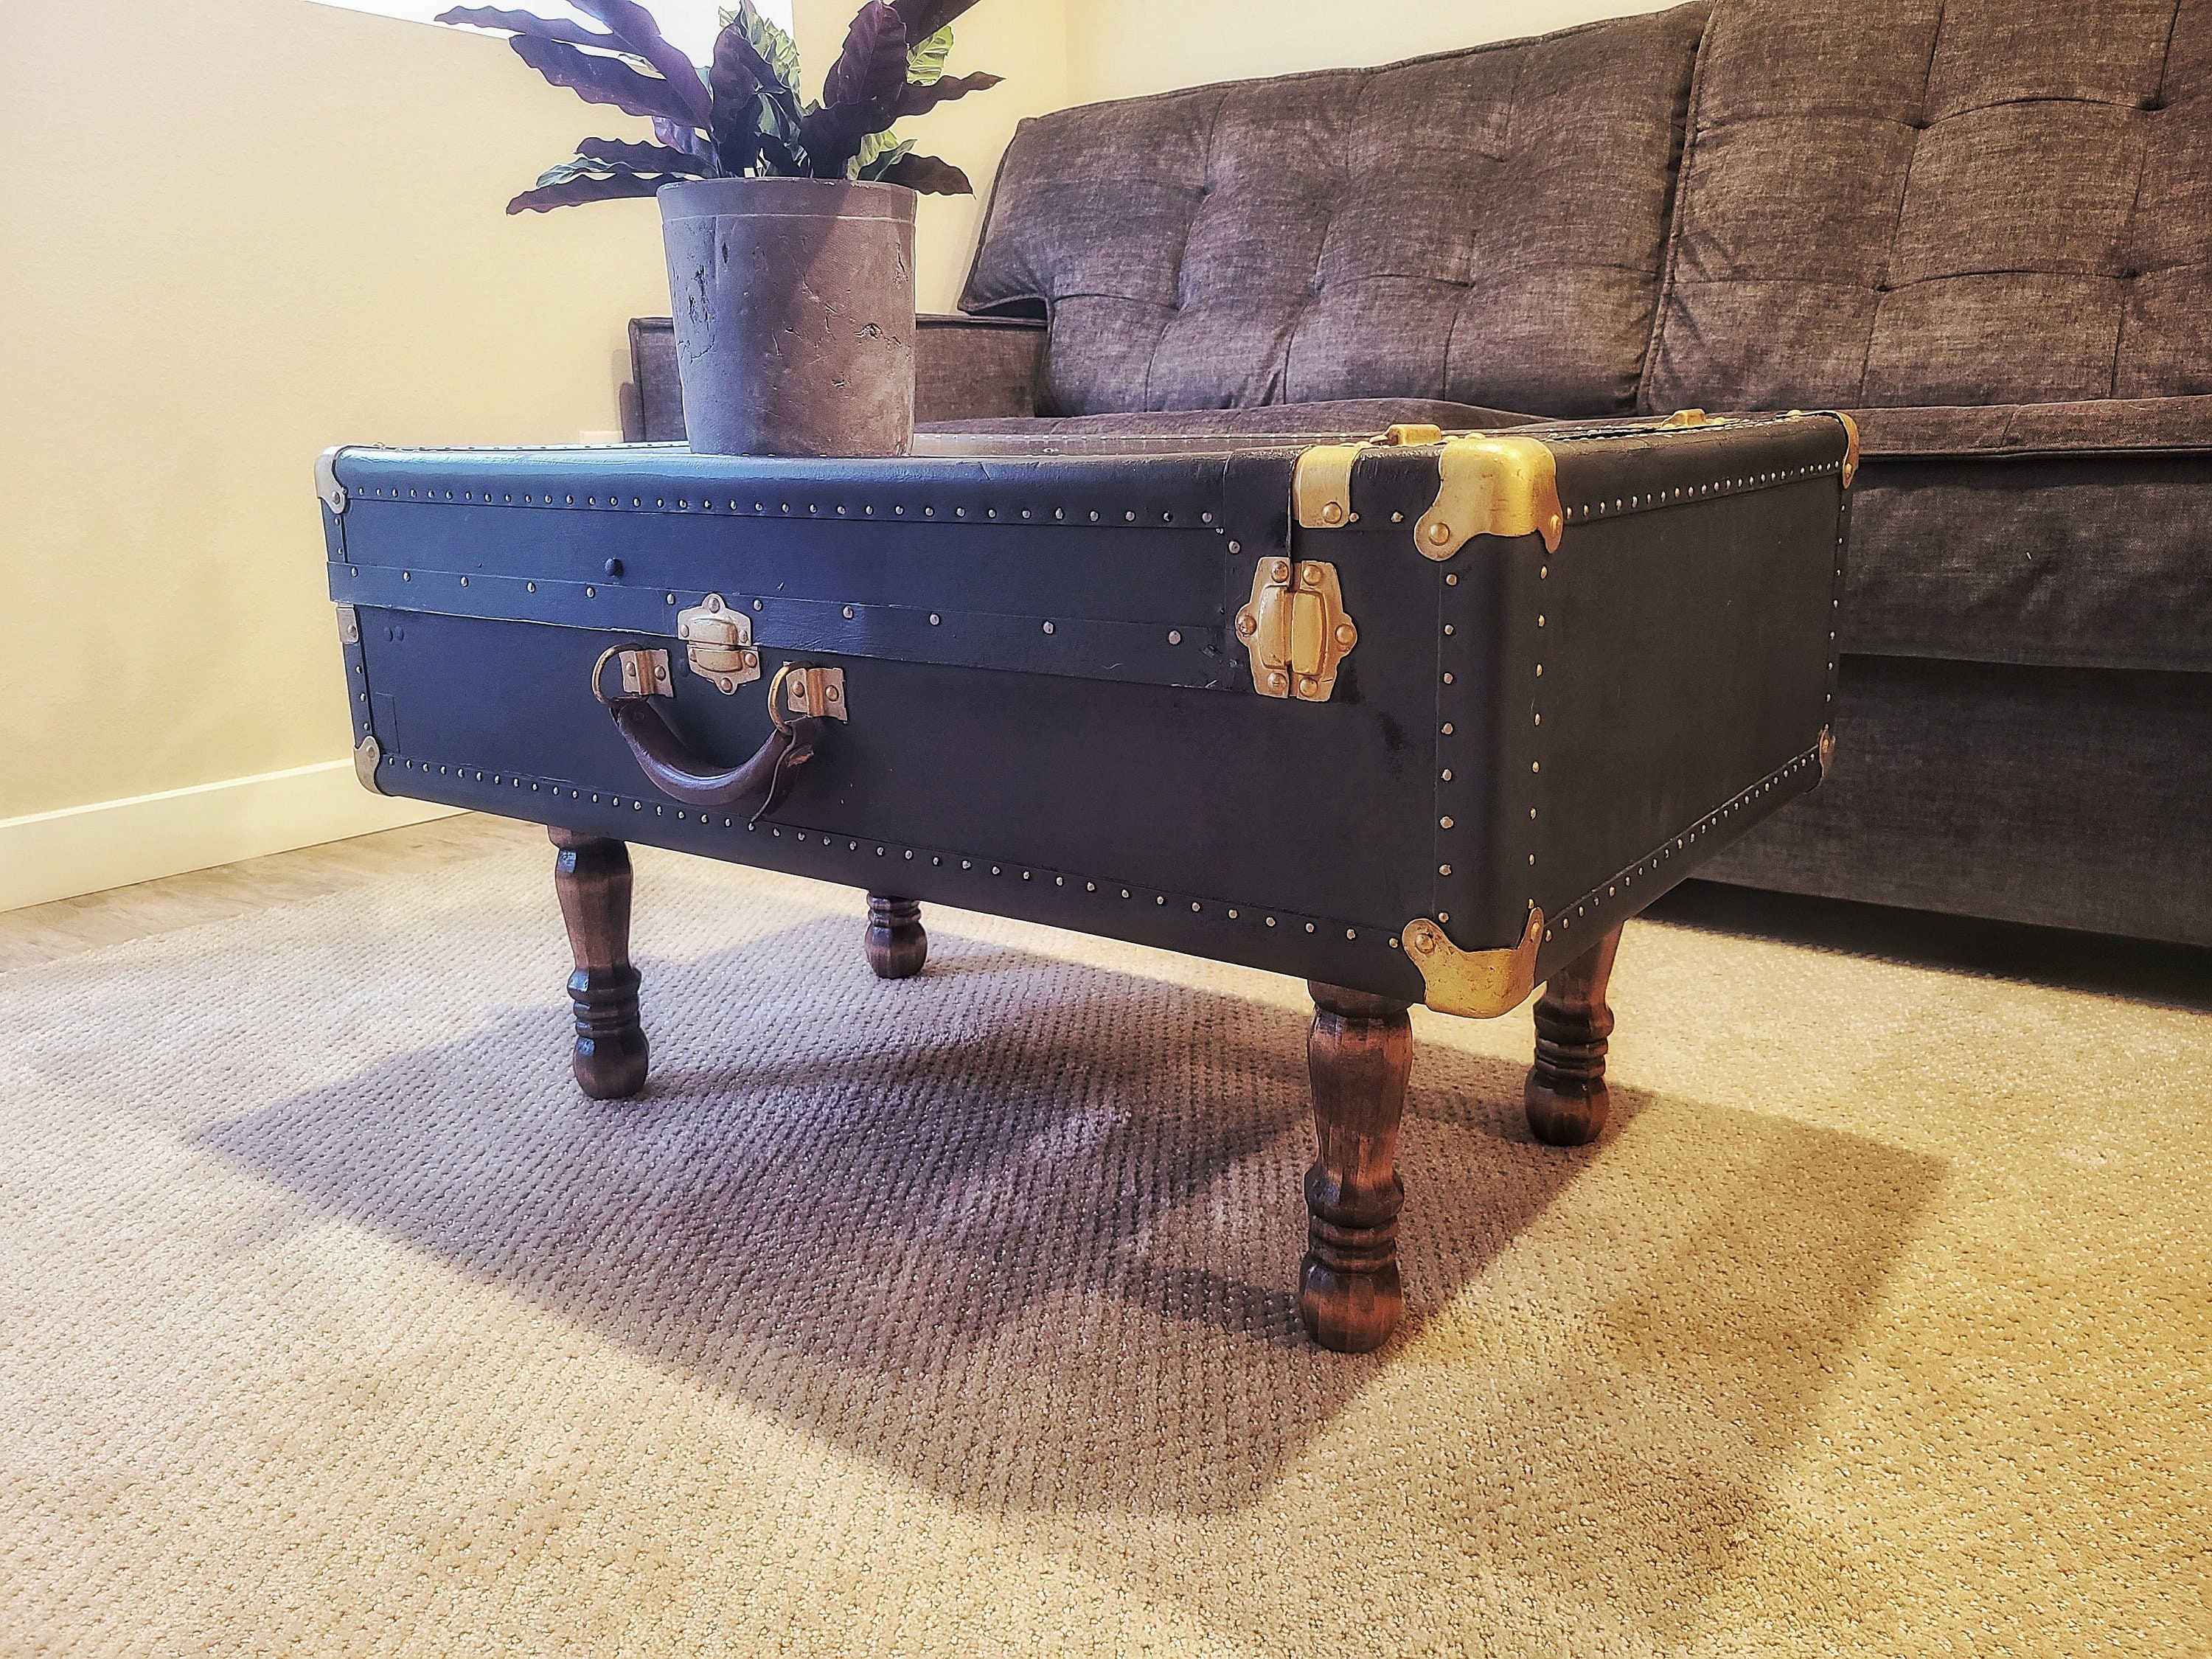 Maritime Trunk Coffee Table, Color: Walnut - JCPenney